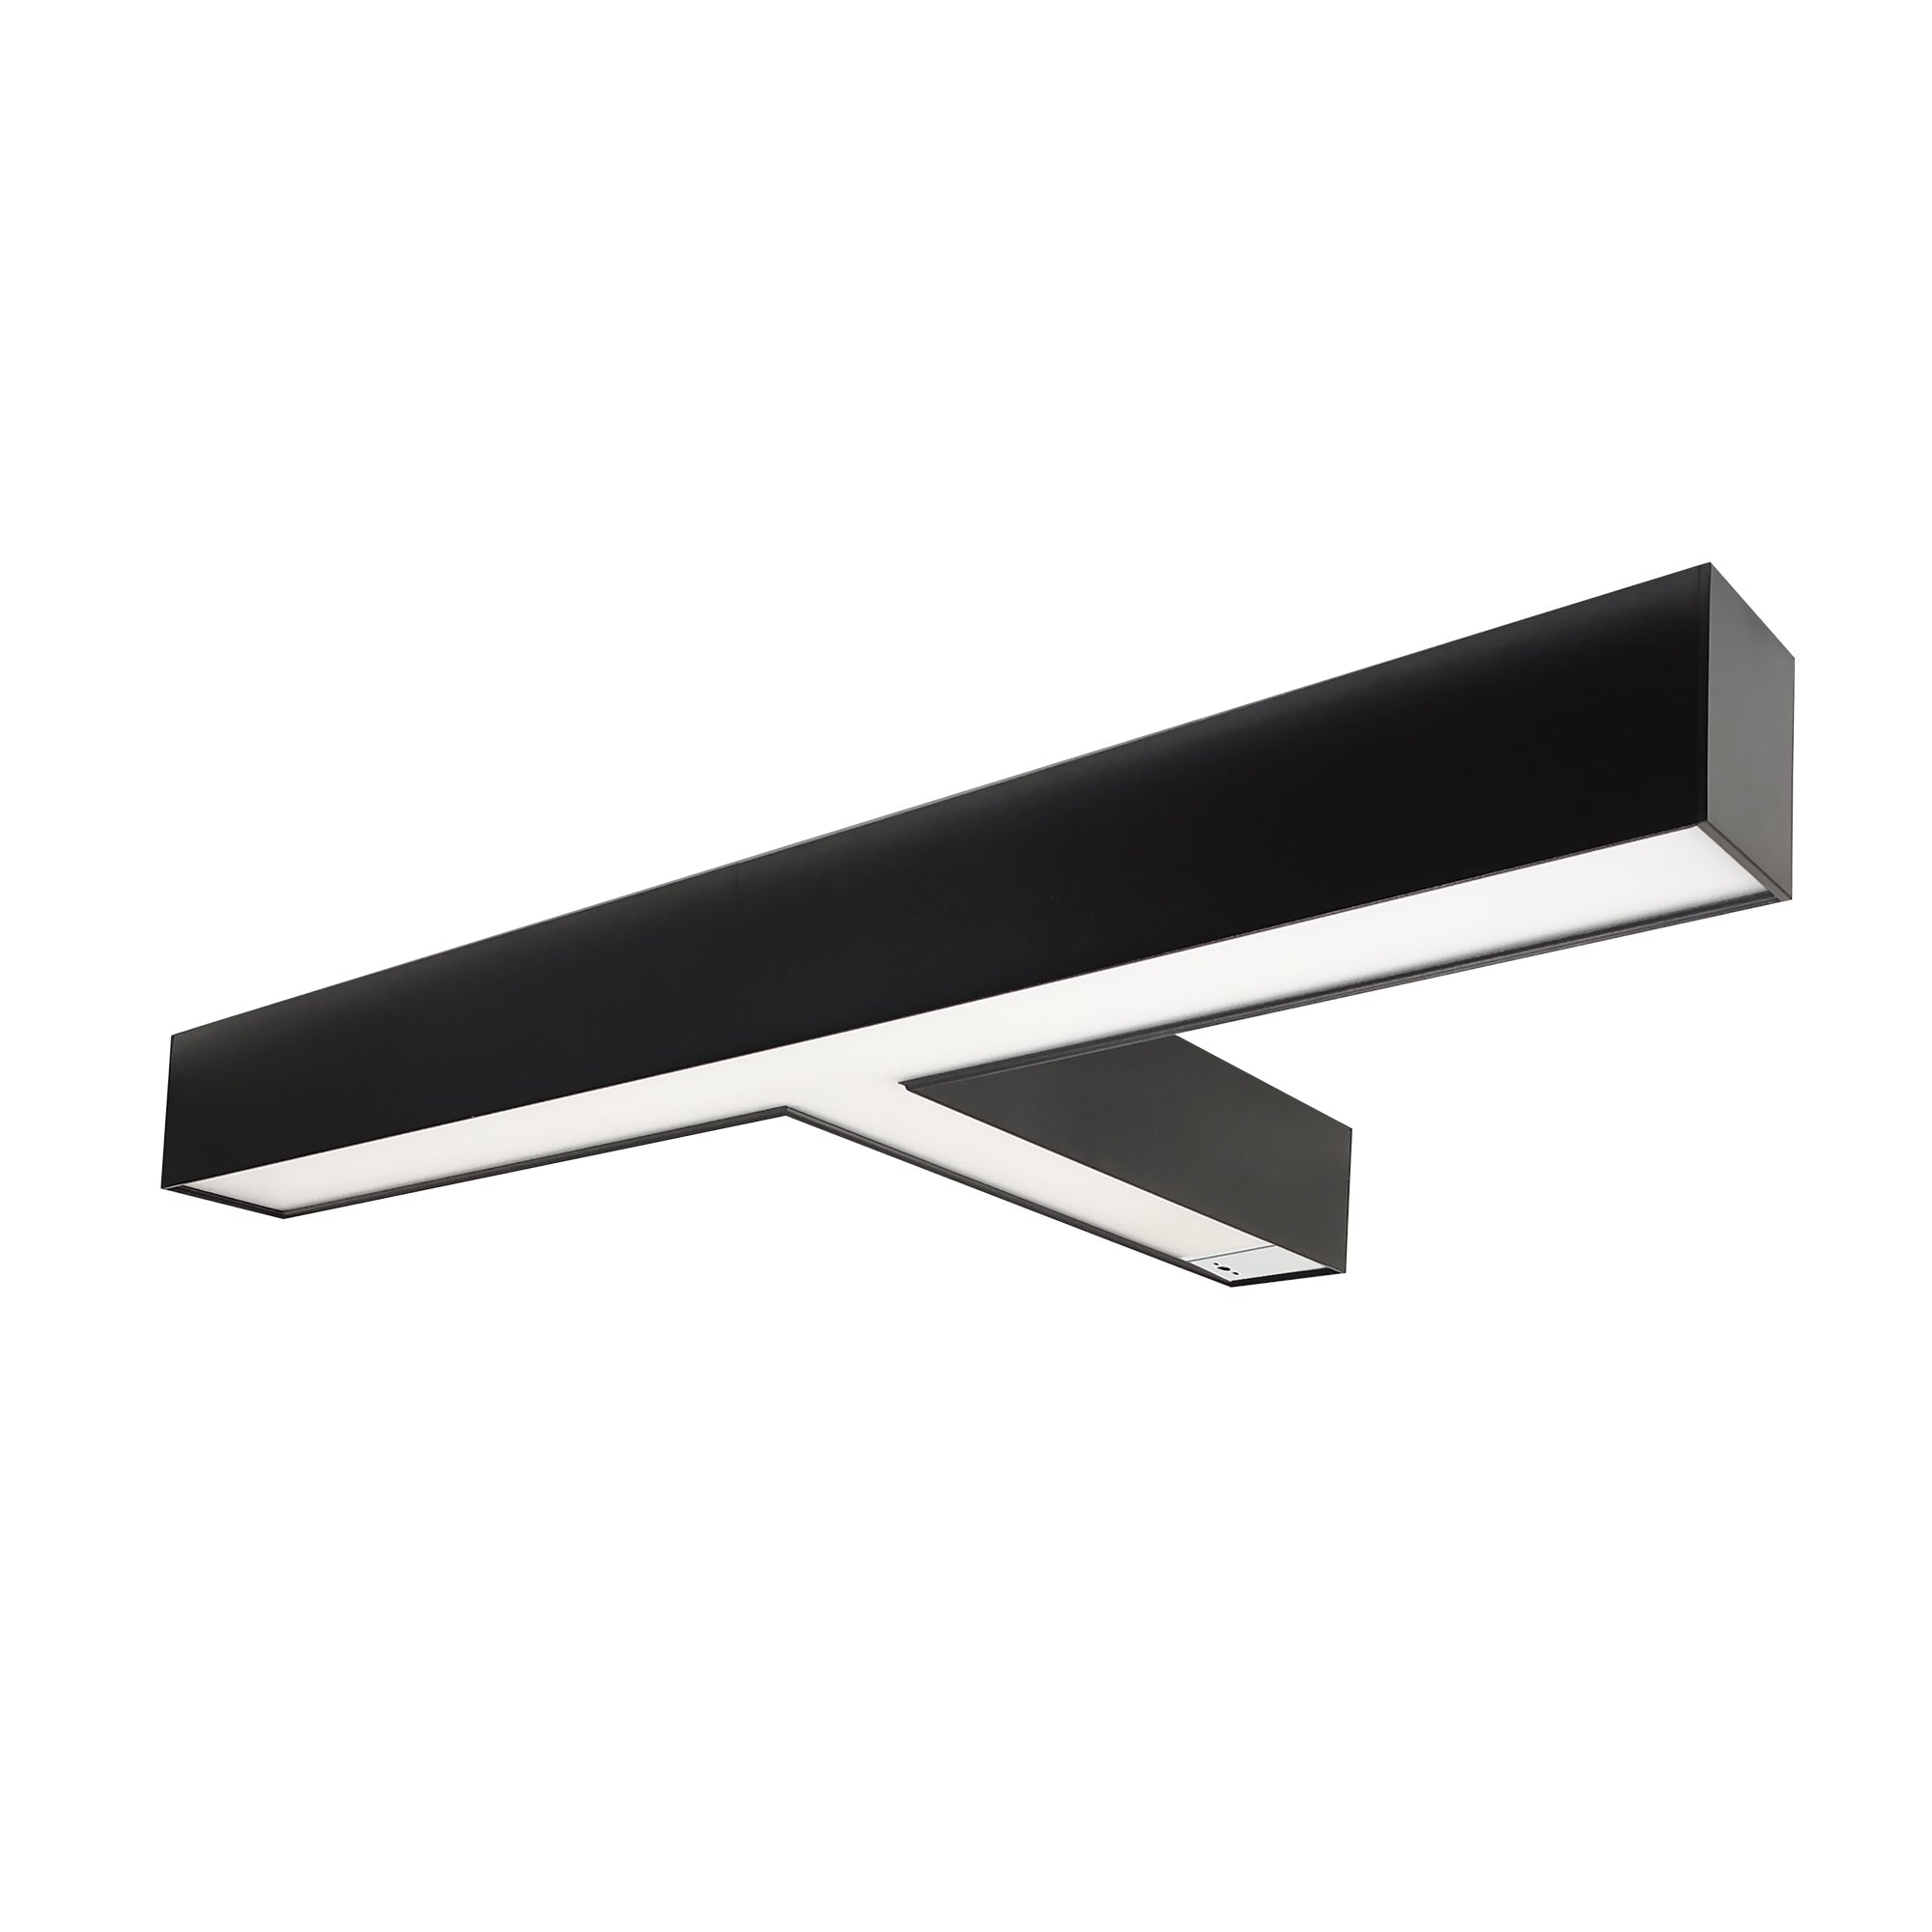 Nora Lighting NLUD-T334B/OS - Linear -  InchT Inch Shaped L-Line LED Indirect/Direct Linear, 5027lm / Selectable CCT, Black Finish, with Motion Sensor